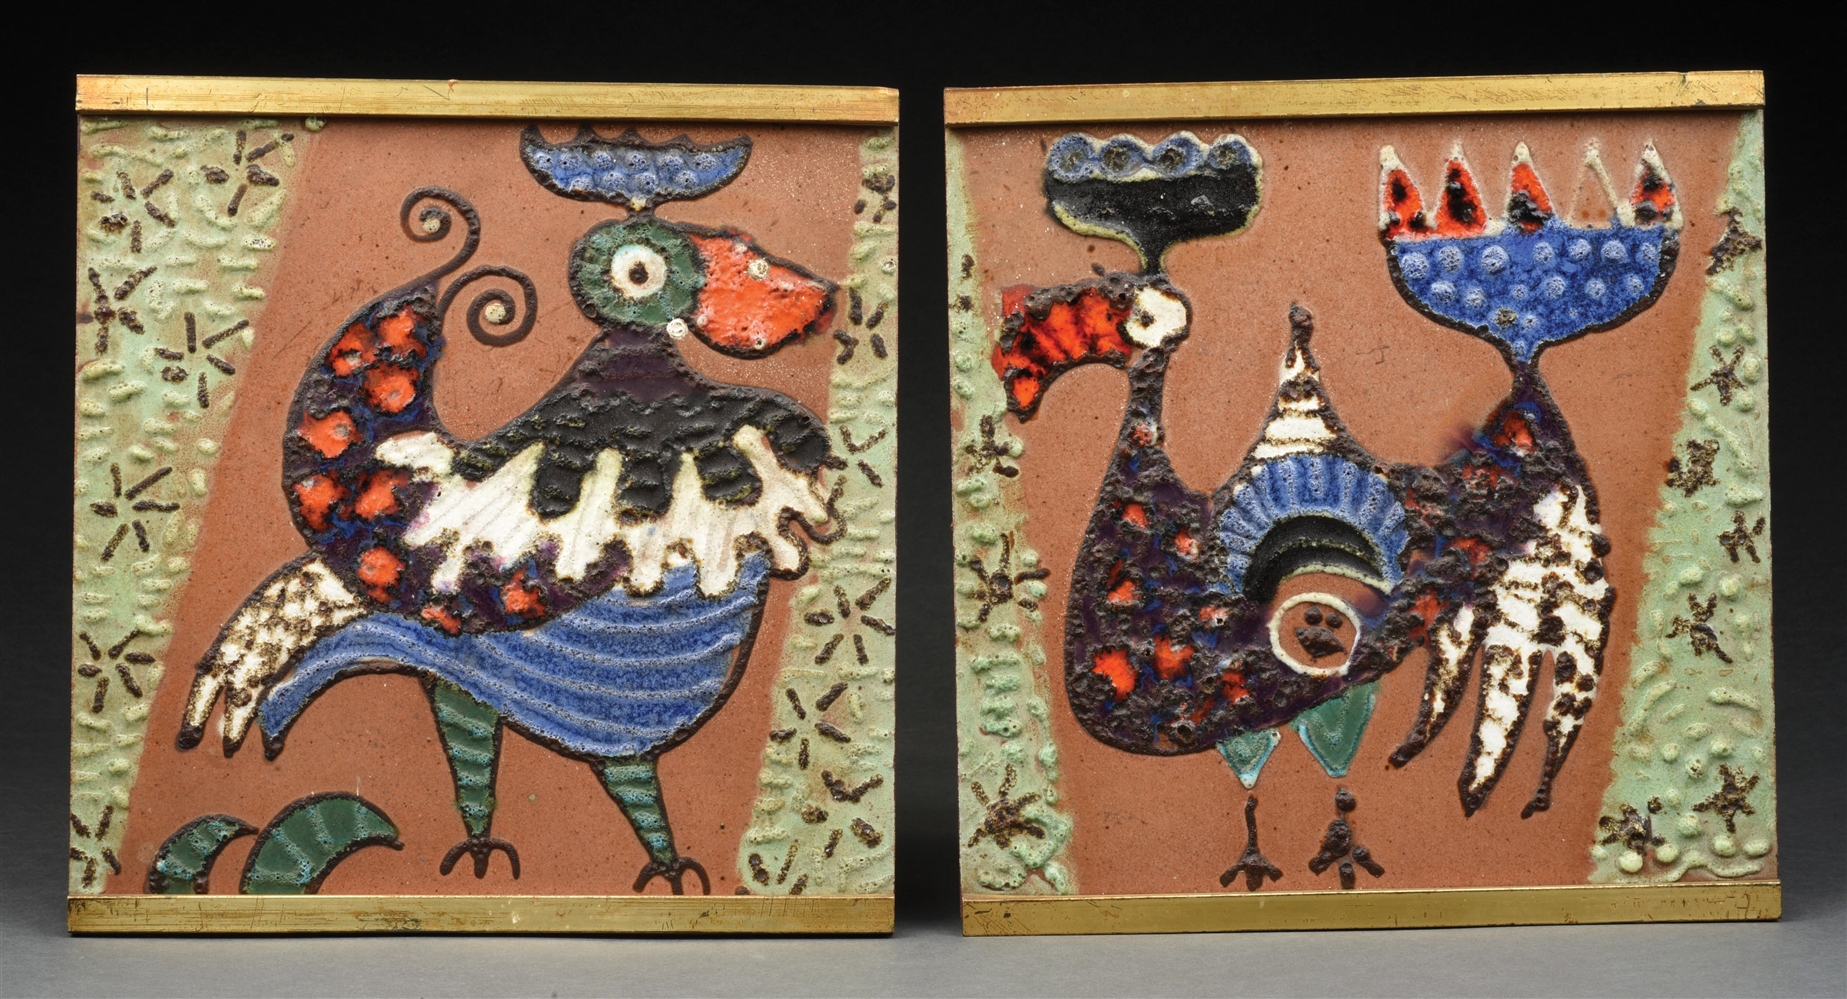 PAIR OF HAND-PAINTED MAJOLICA FOLK ART CHICKENS ON TILE.